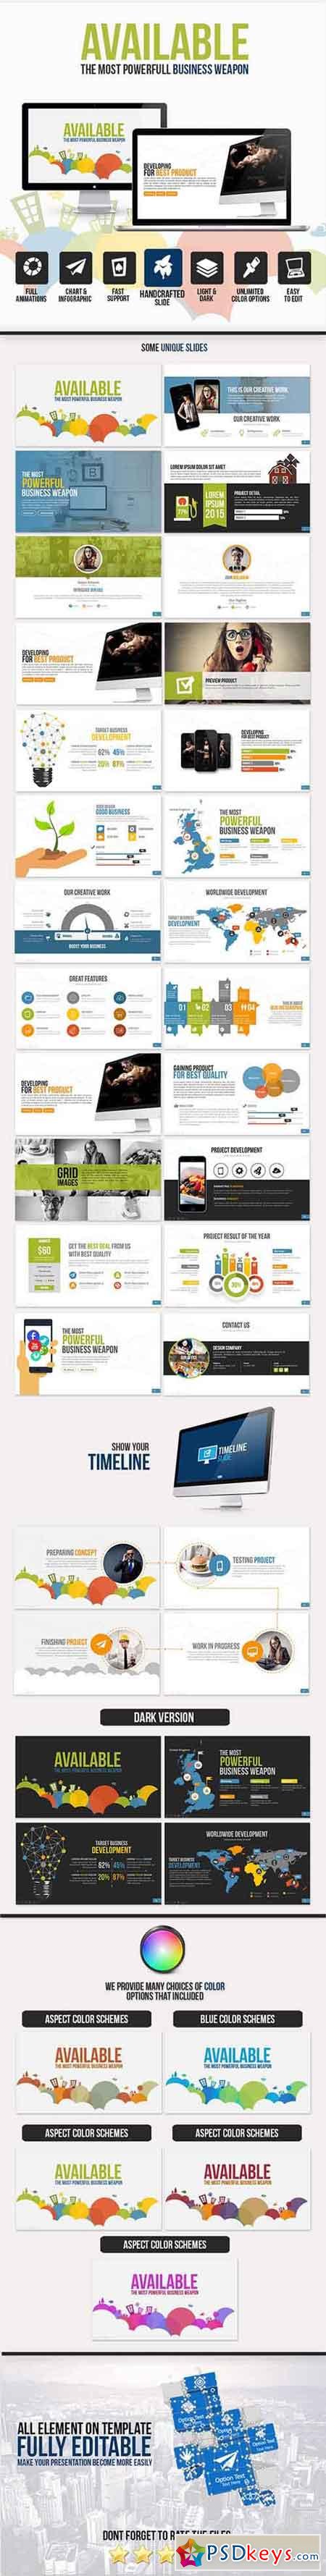 Available PowerPoint Template 10924156